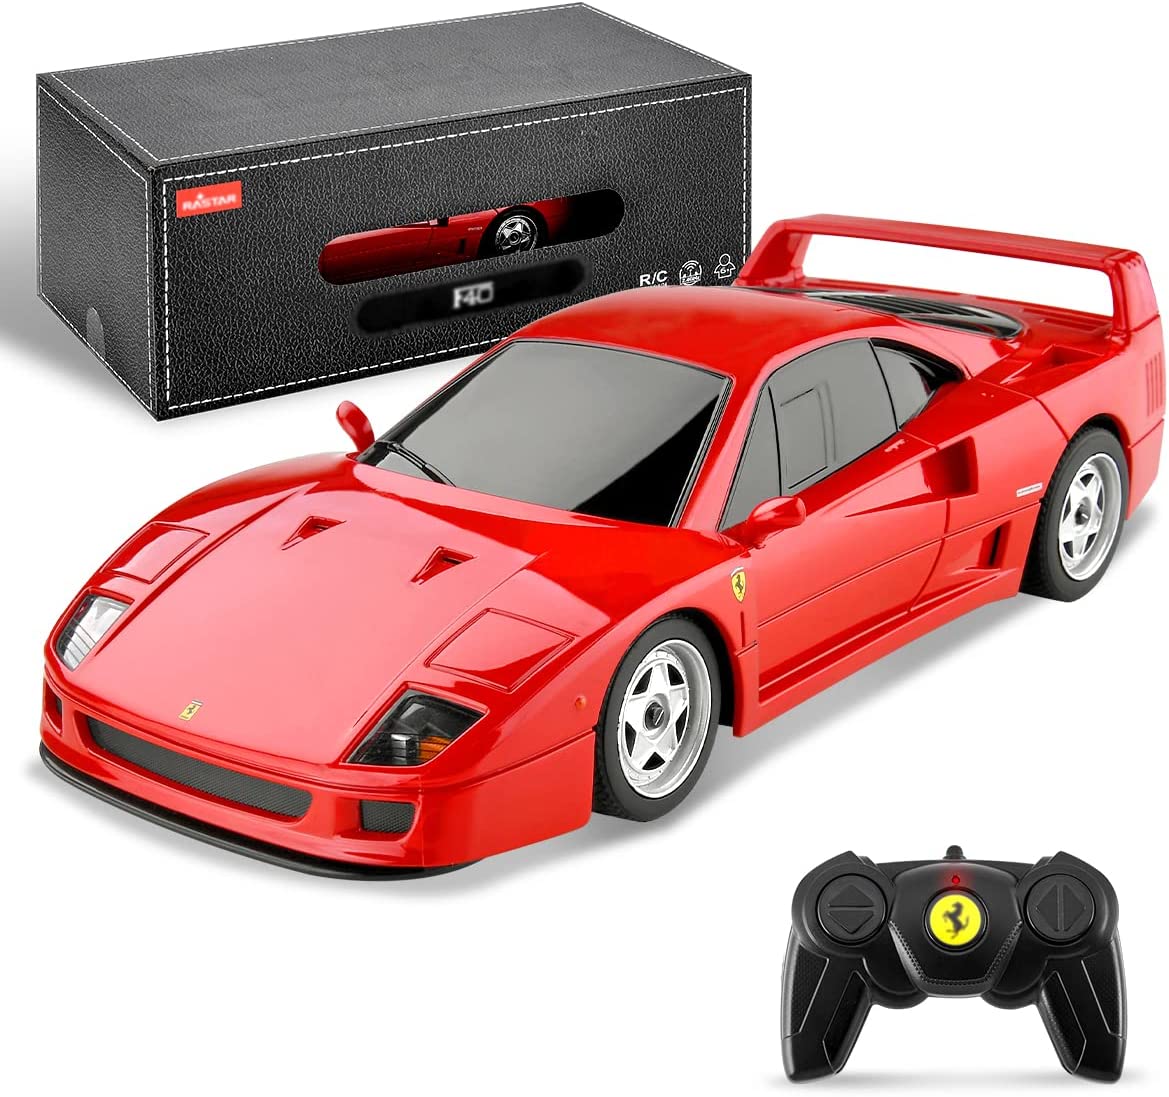 Ferrari F40 Remote Control Car - BEZGAR Officially Licensed Ferrari Toy Car Model，1:24 Sport Race Car for Kids, Adults, Girls and Boys Holiday Ideas Gift (78800 Red) $11.27